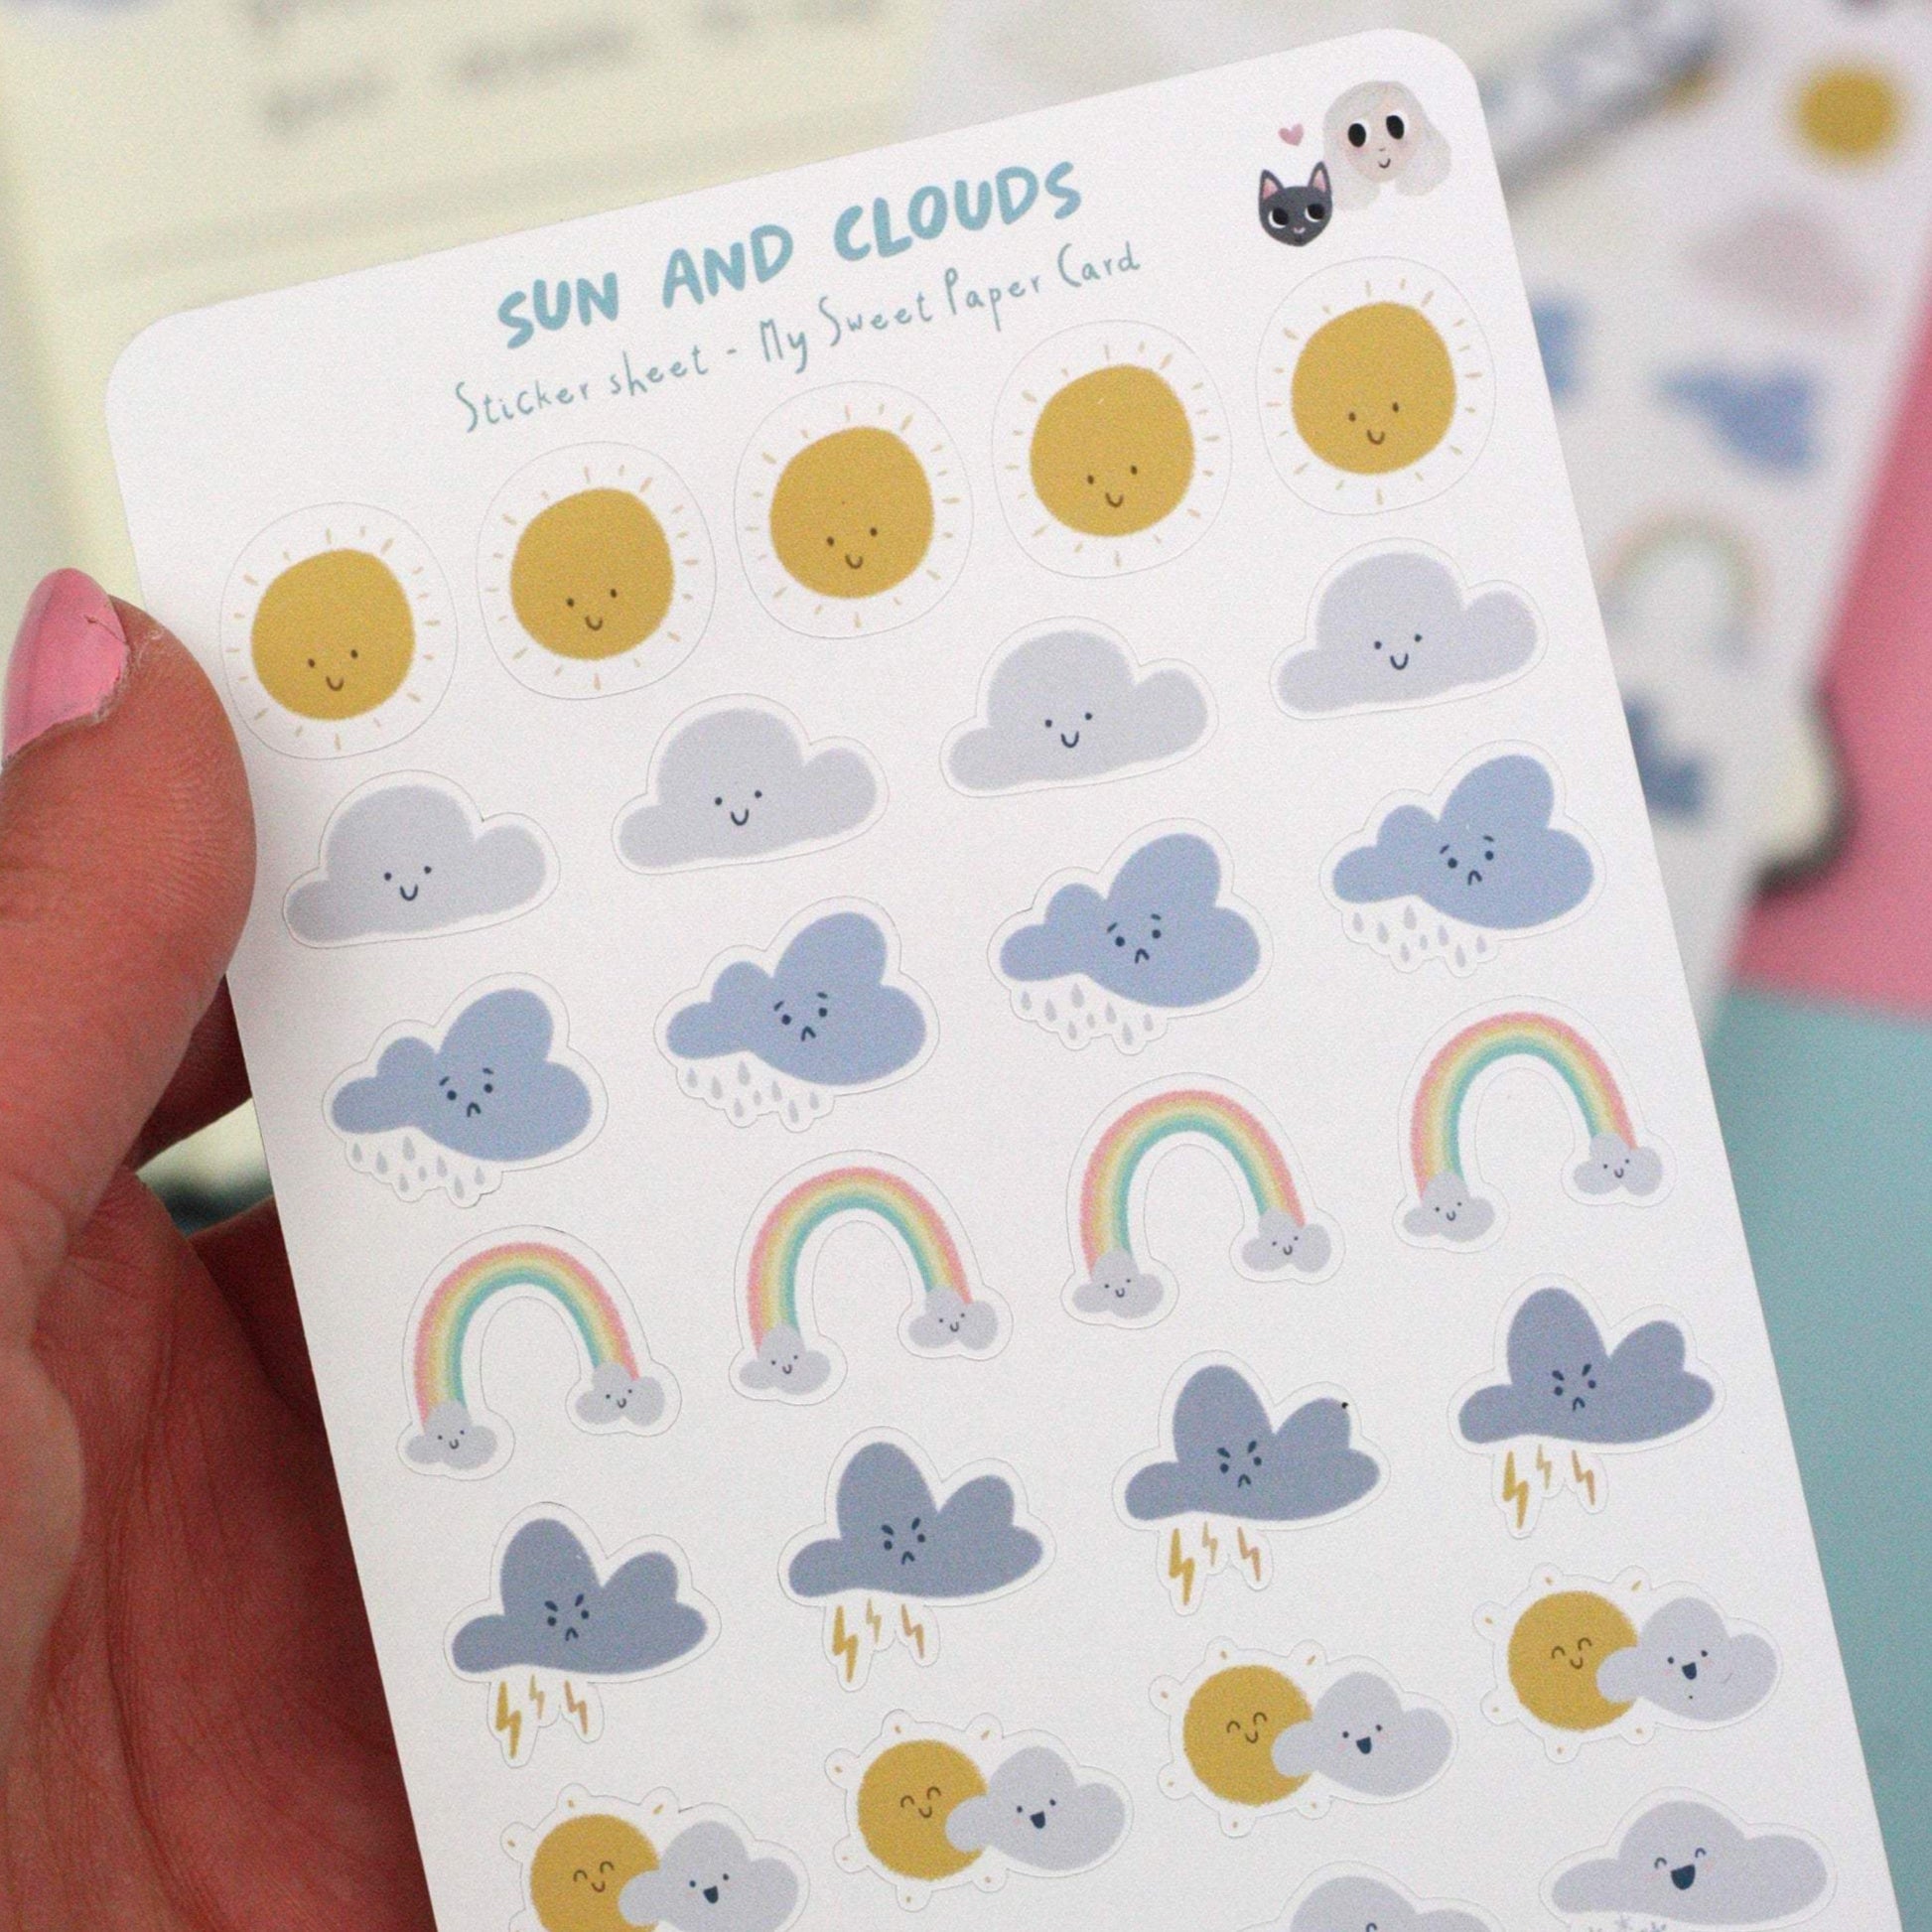 sun and clouds stickers sheet